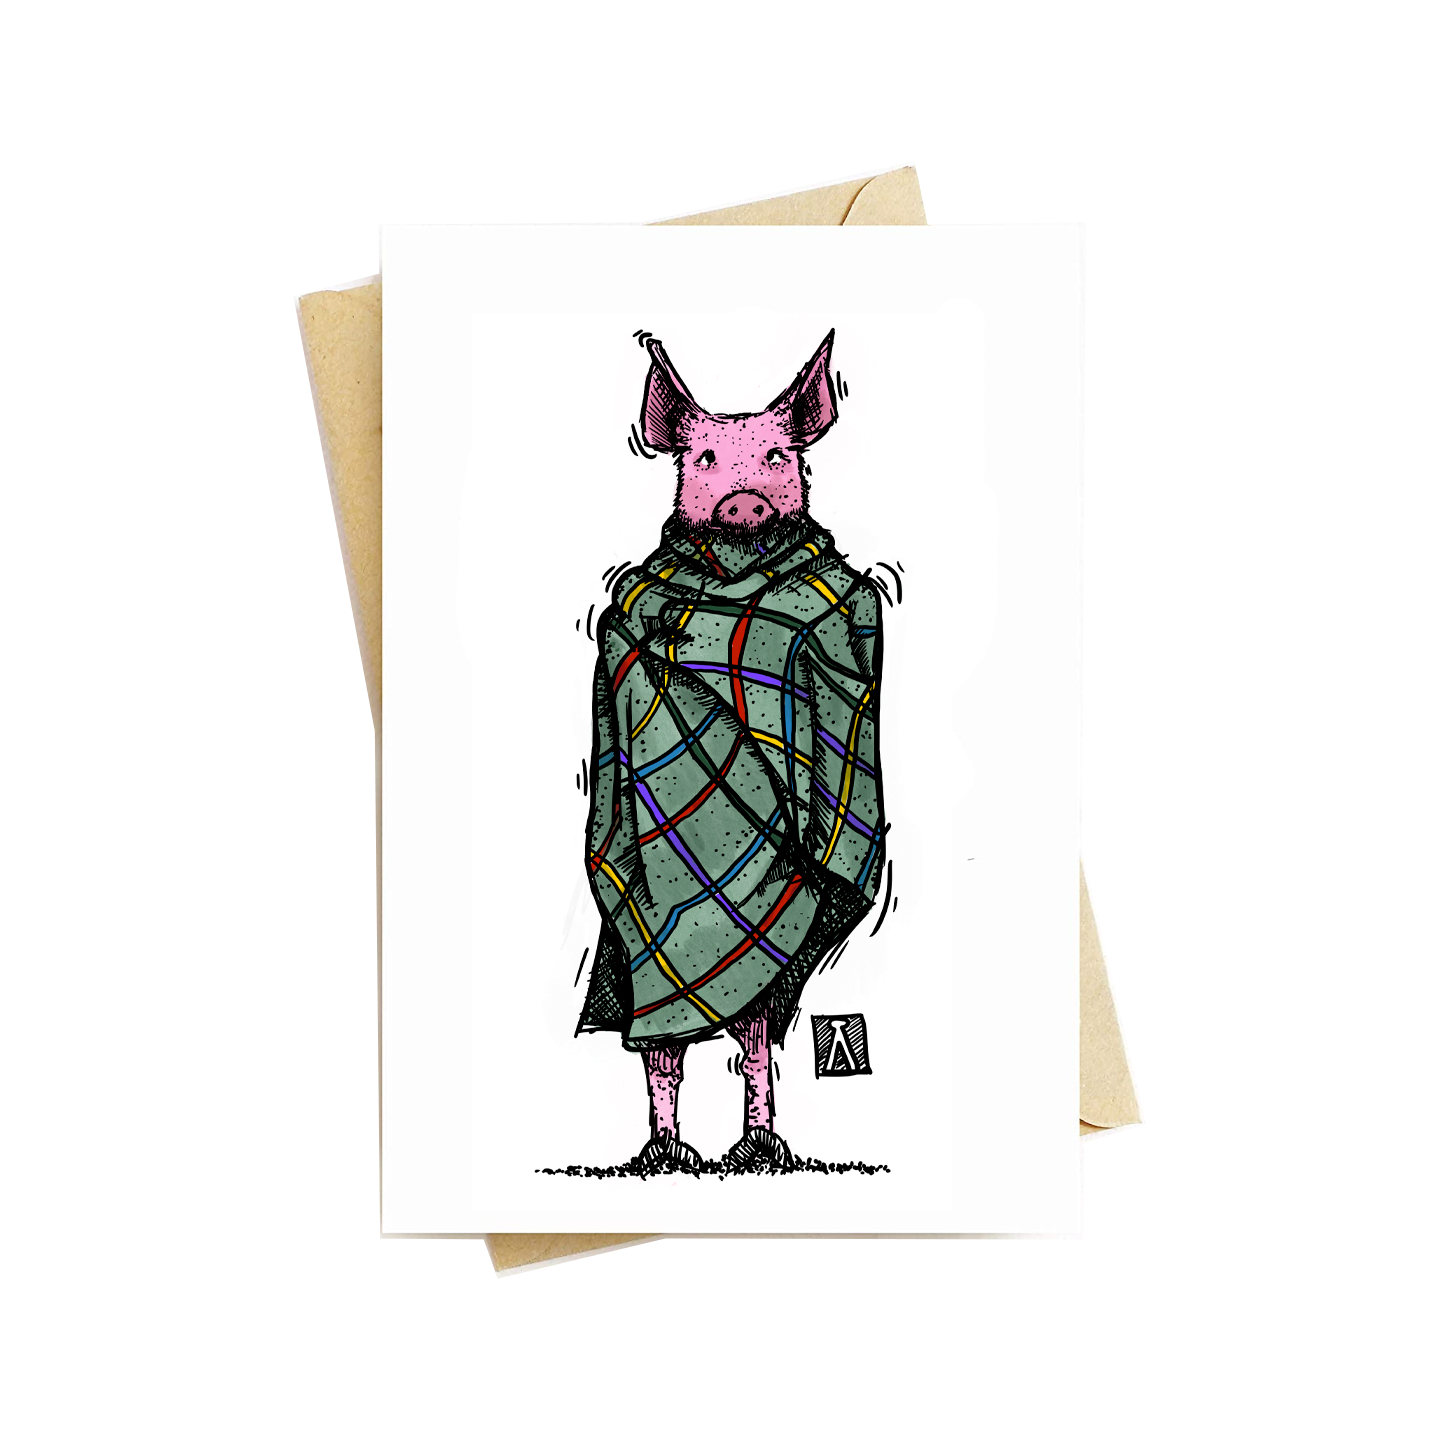 BellavanceInk: Get Well Card With Sick Pig In A Blanket 5 x 7 Inches